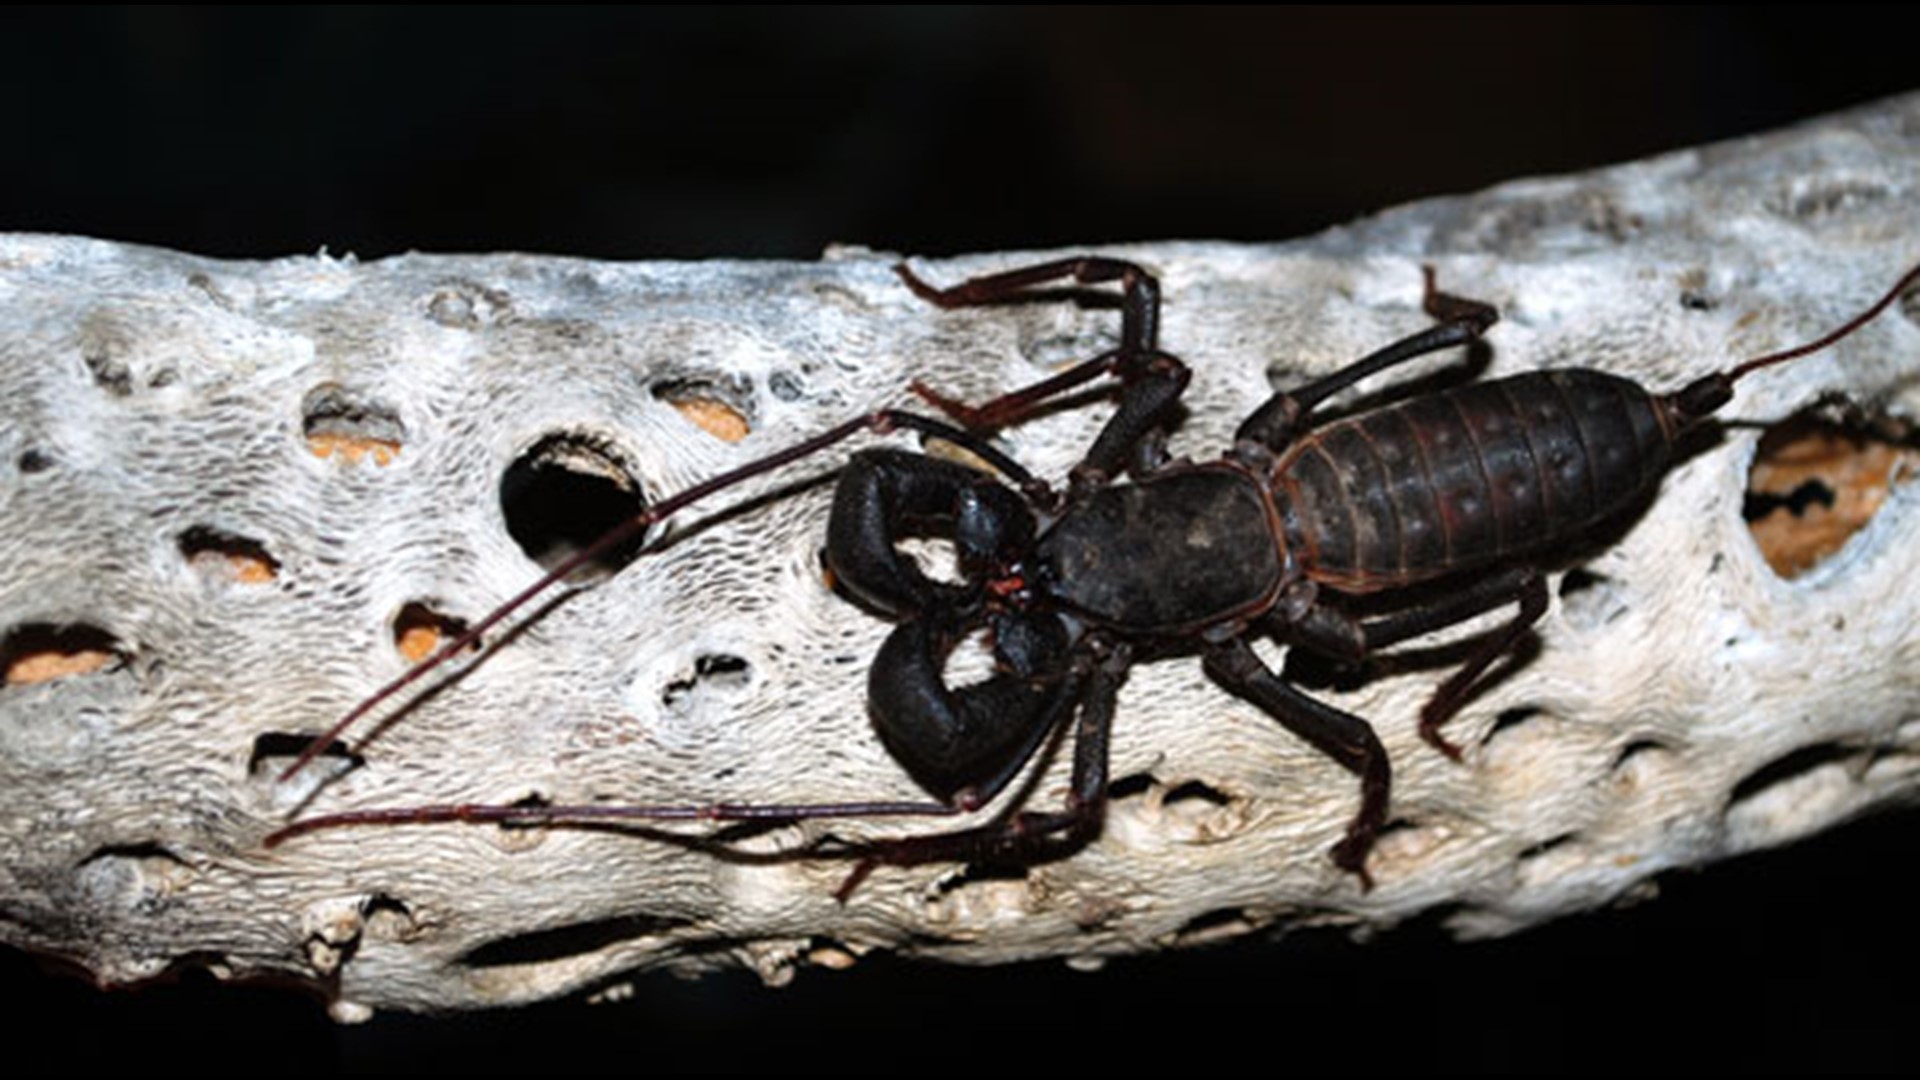 There's an insect that is a mix between a scorpion and a spider; sounds like what nightmares are made of, right?